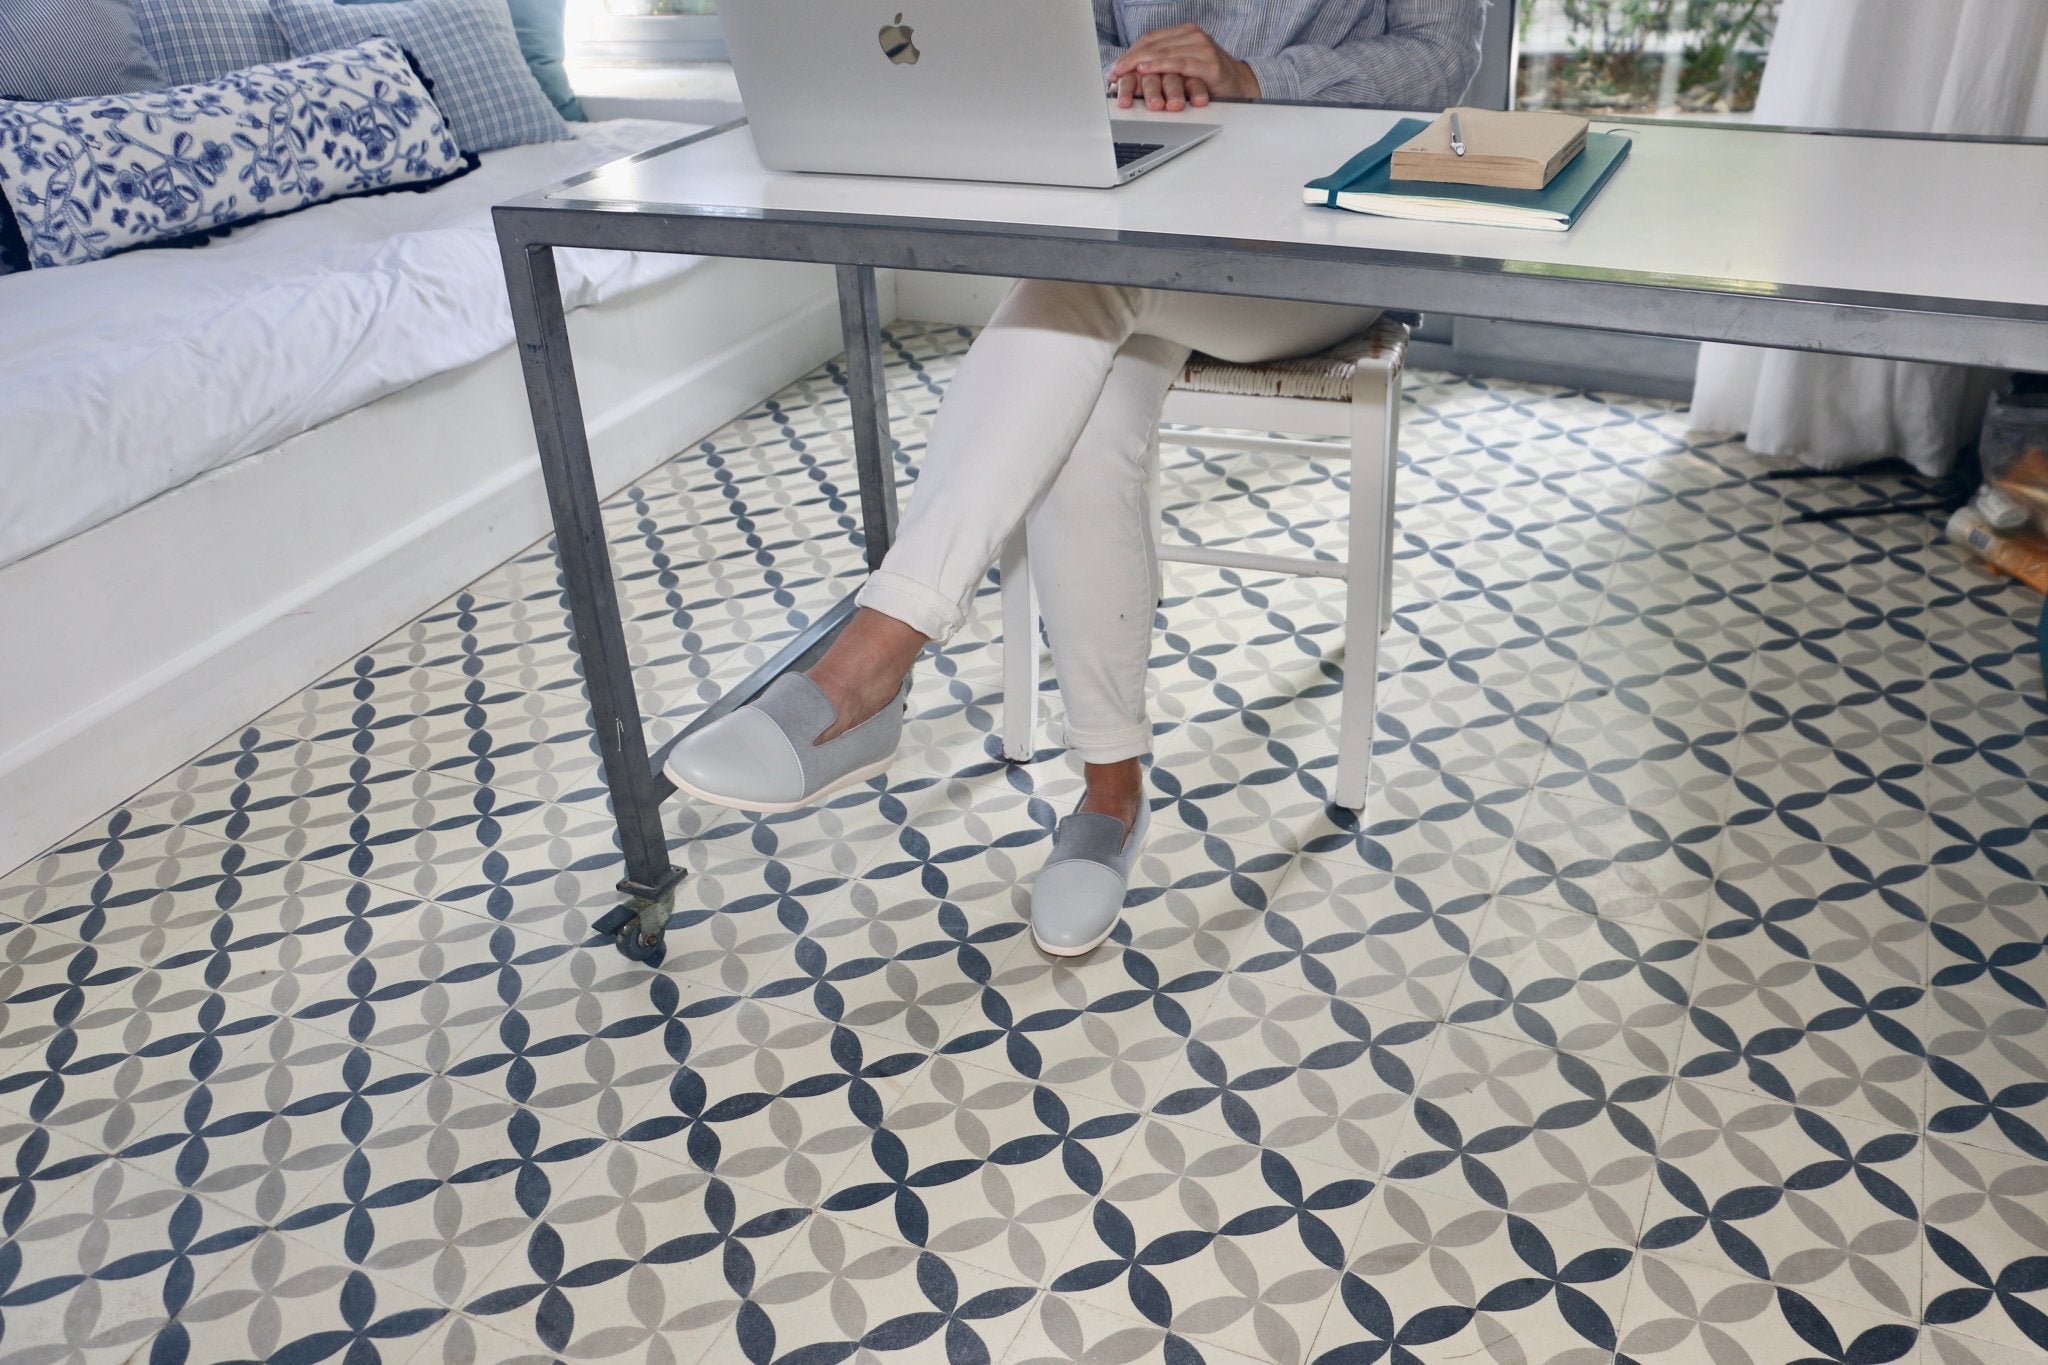 Wear Shoes When You Work From Home?